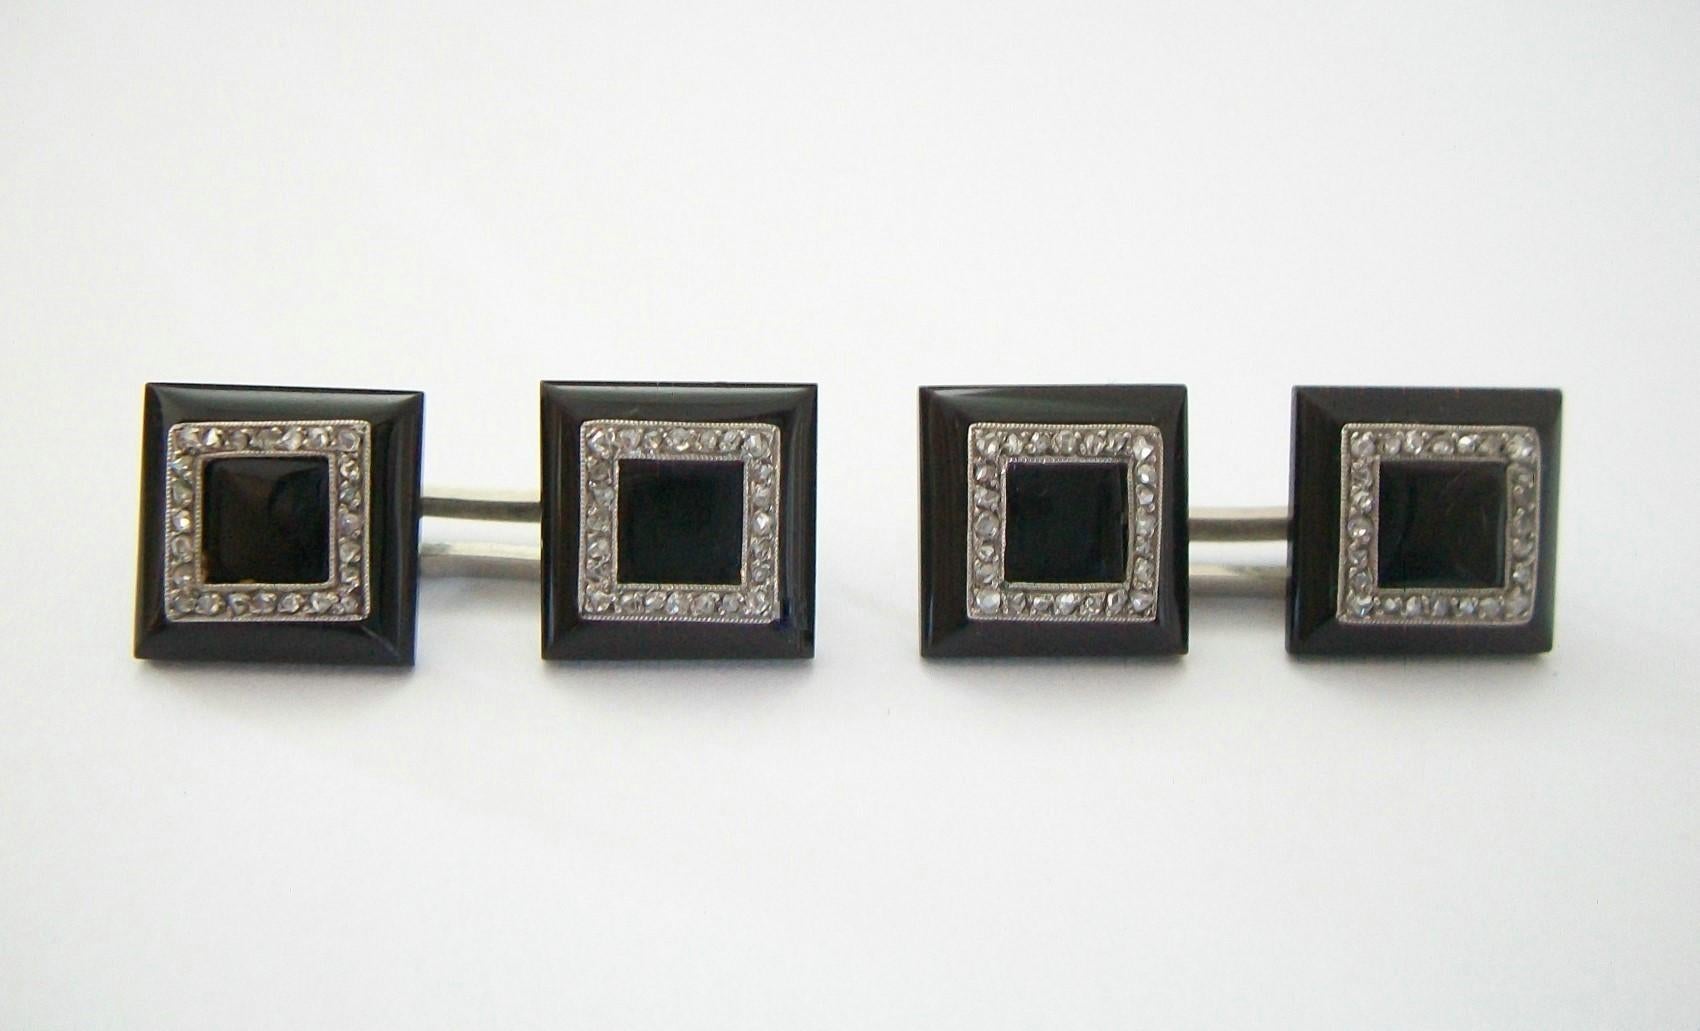 Rare Art Deco onyx, rose cut diamonds and 18K white gold cufflinks - refined and elegant double sided design - hand made to the highest quality - featuring invisibly set black onyx squares and borders with soft bevels to the outer edges - each